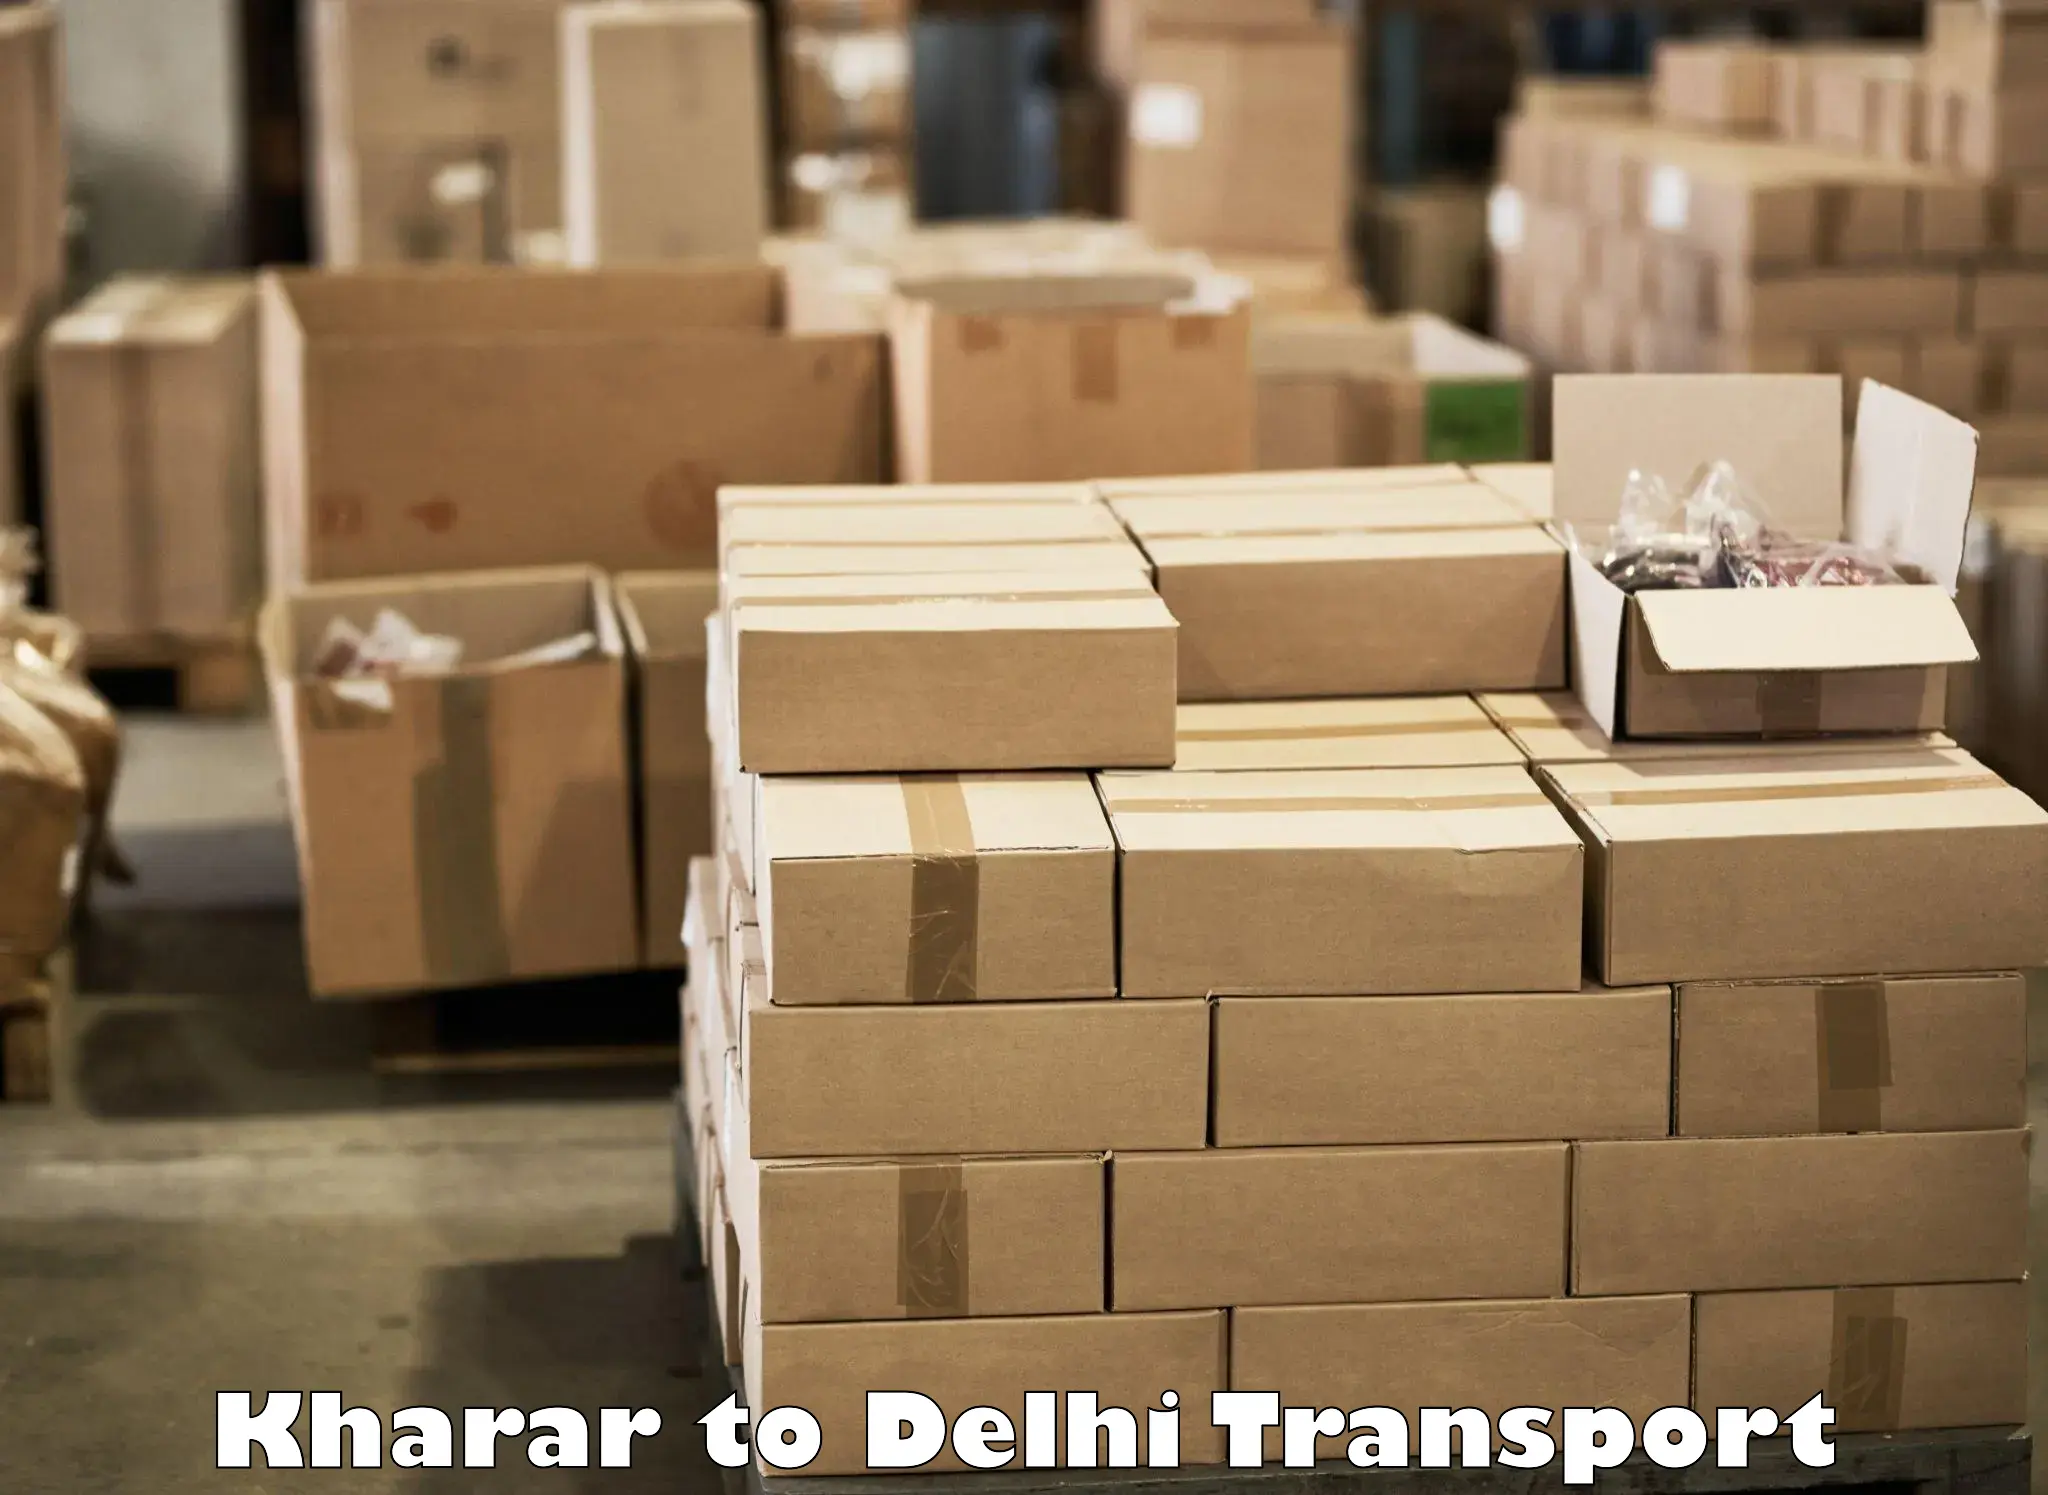 Lorry transport service Kharar to NCR